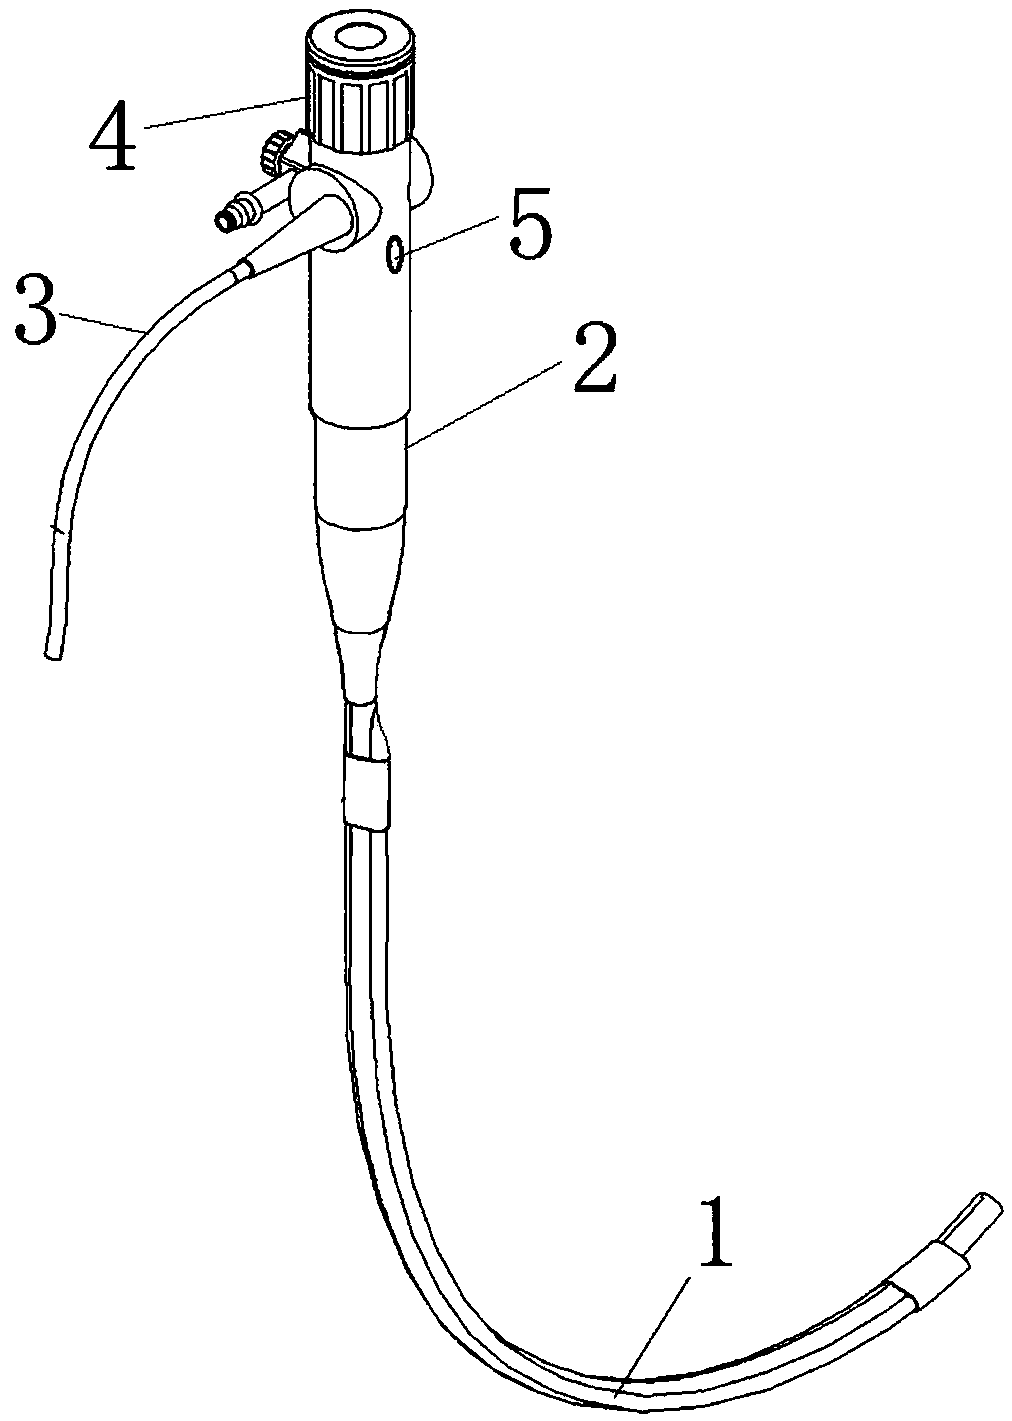 Bronchoscope fixing system with angle adjustability